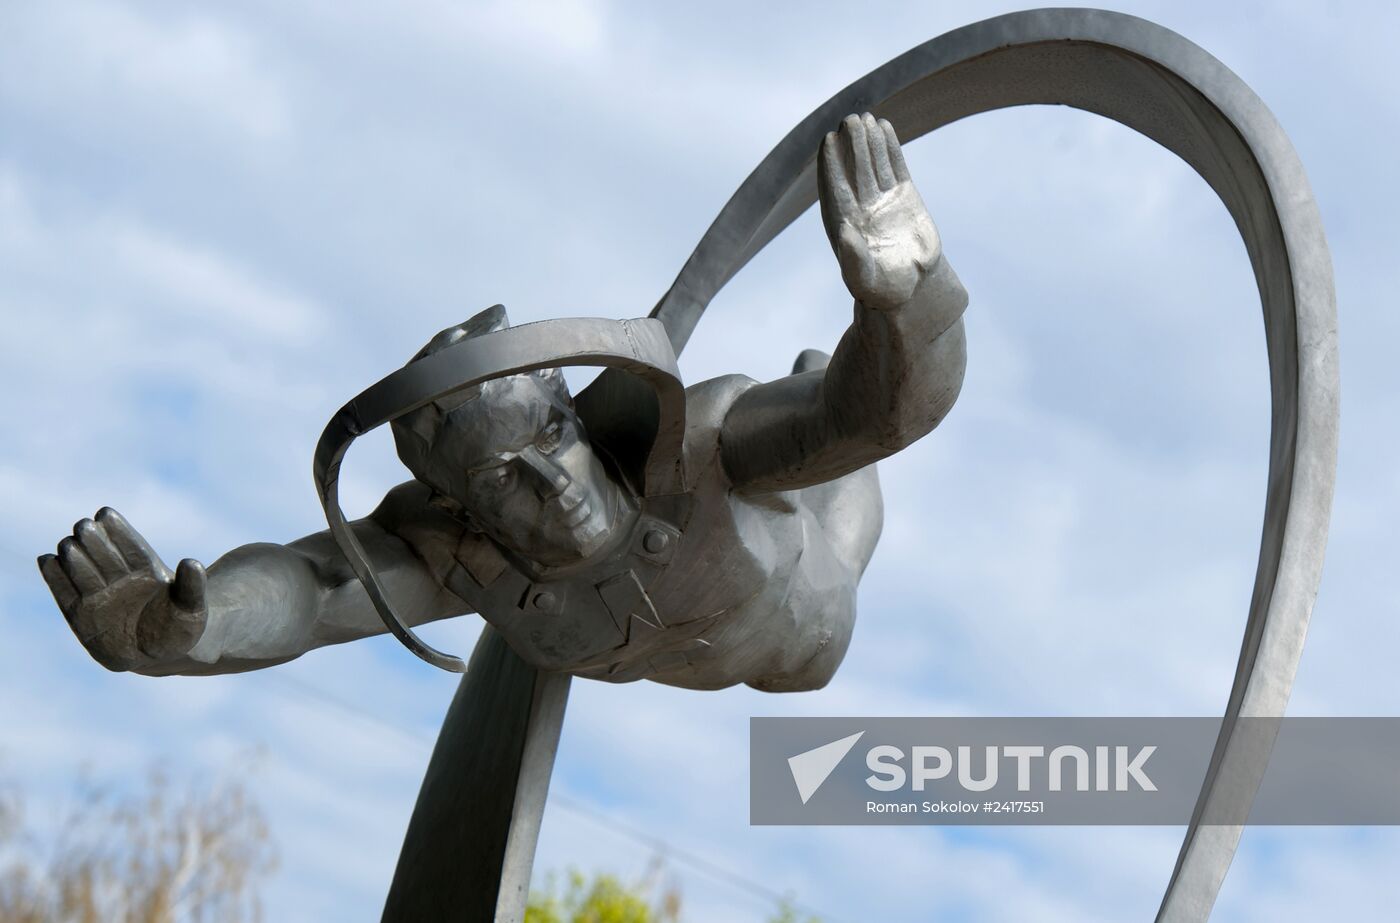 Monument to Yury Gagarin in Star City